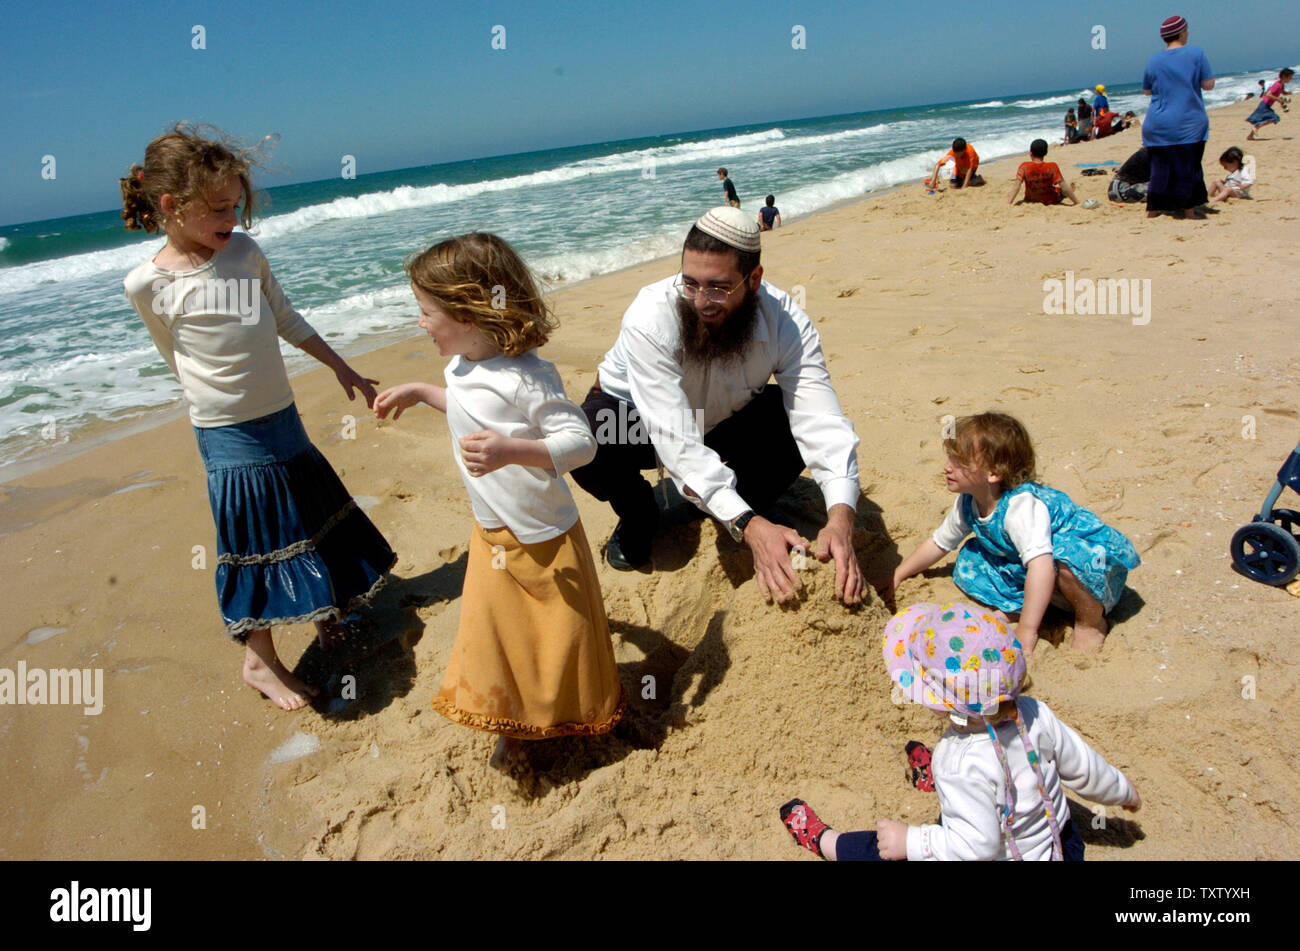 Israeli settlers enjoy the beach in the Gush Katif Settlement, Shirat Hayam, in the Gaza Strip, April 26, 2005. Israelis are visiting the Gush Katif settlements during the Passover holiday to show support to the Gaza settlers against the upcoming disengagement. (UPI Photo/Debbie Hill) Stock Photo